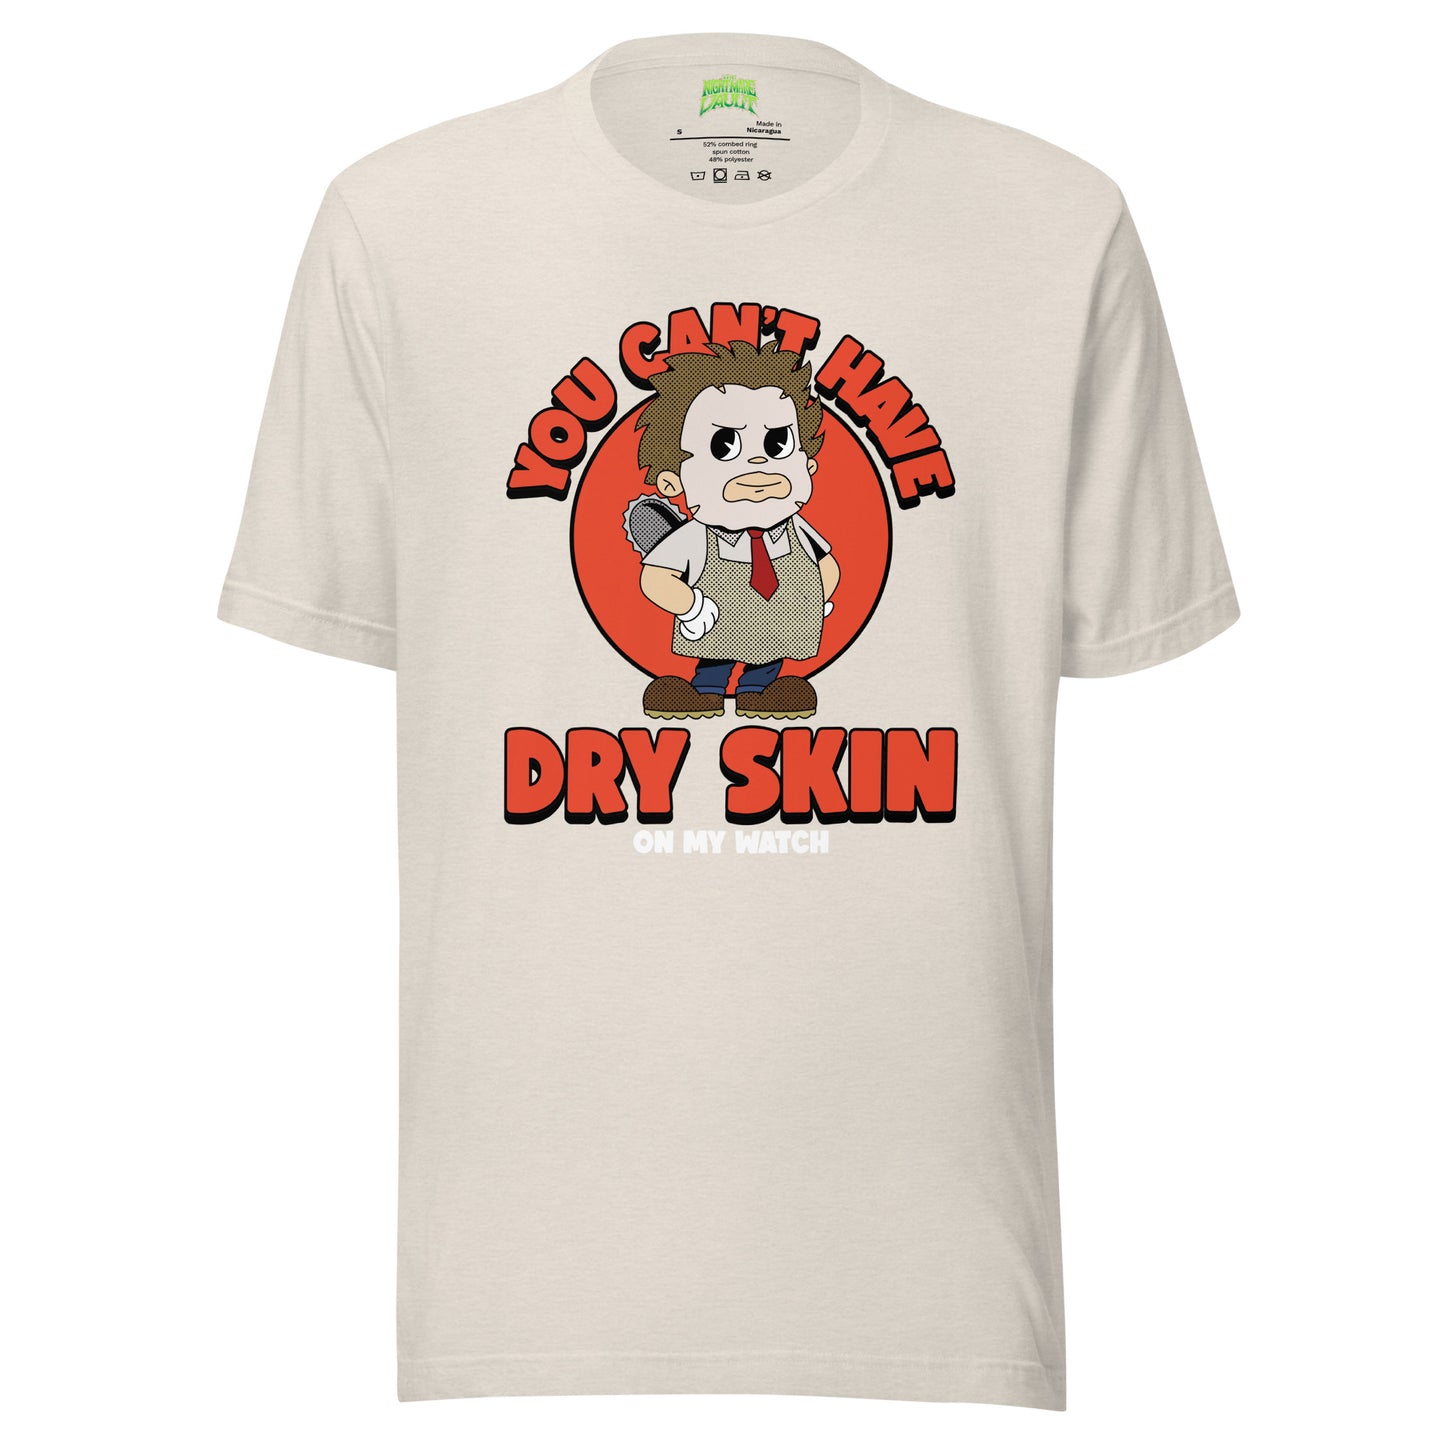 You Can't Have Dry Skin on My Watch tee